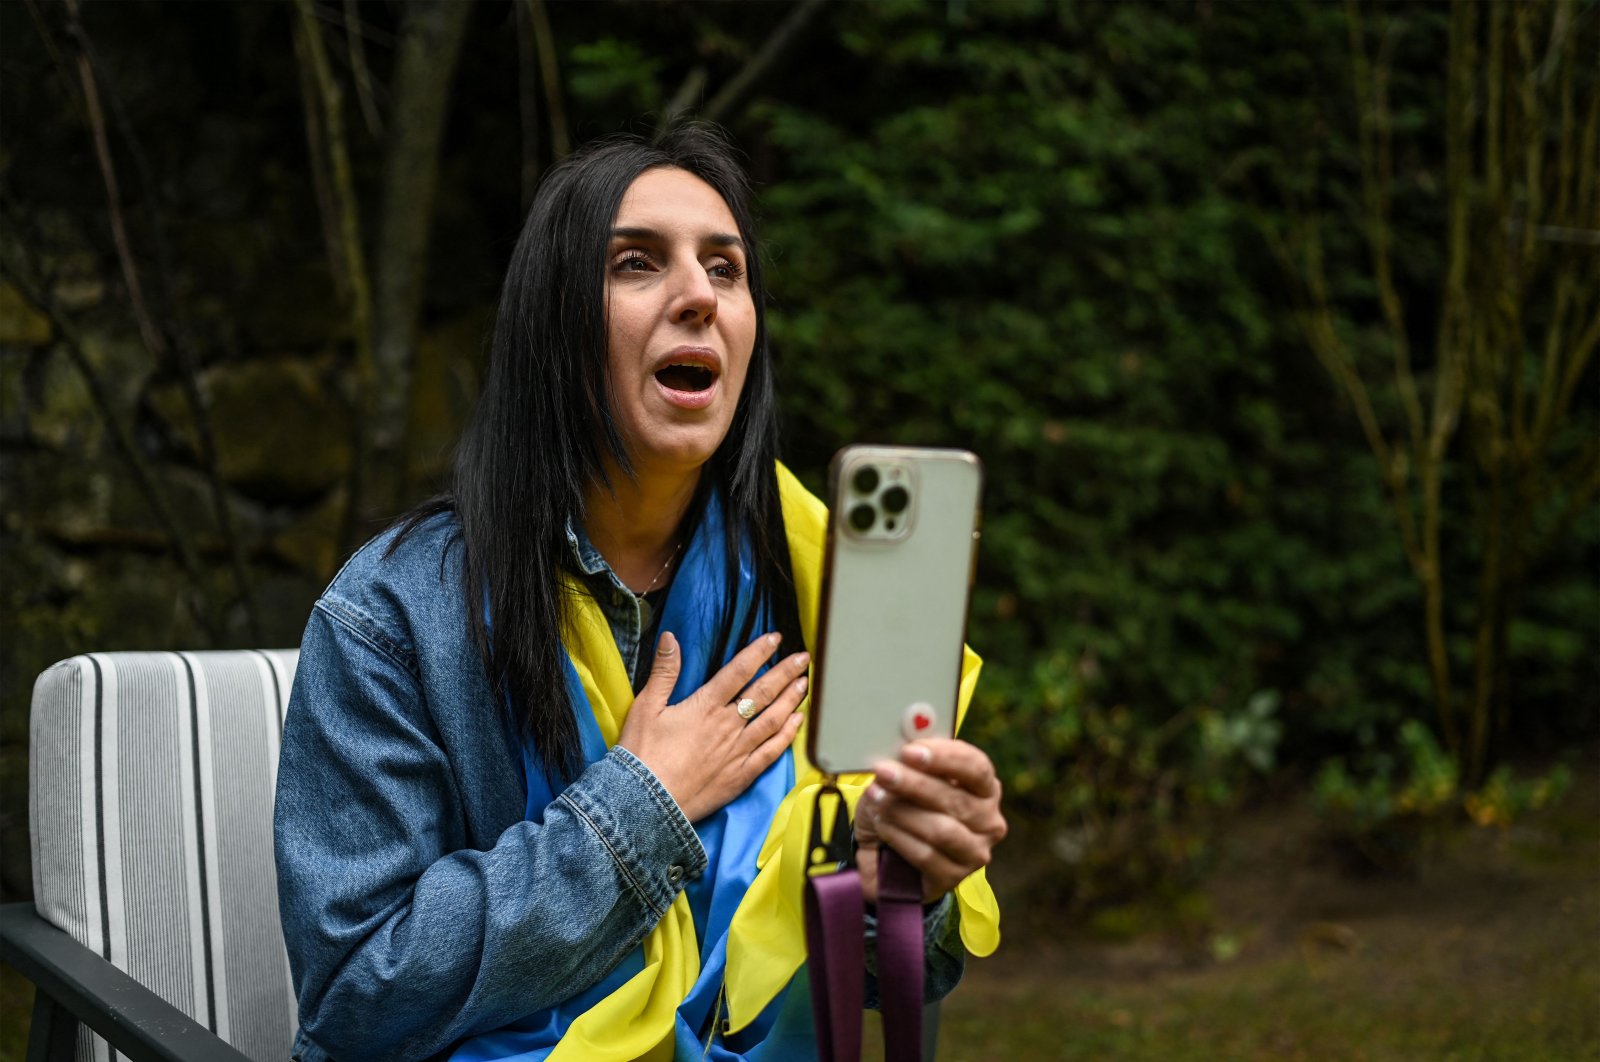 Eurovision song contest winner in 2016, Susana Jamaladinova, known as "Jamala" sings the Ukrainian national anthem to her social media followers during an AFP interview in Istanbul, March 7, 2022. (AFP)